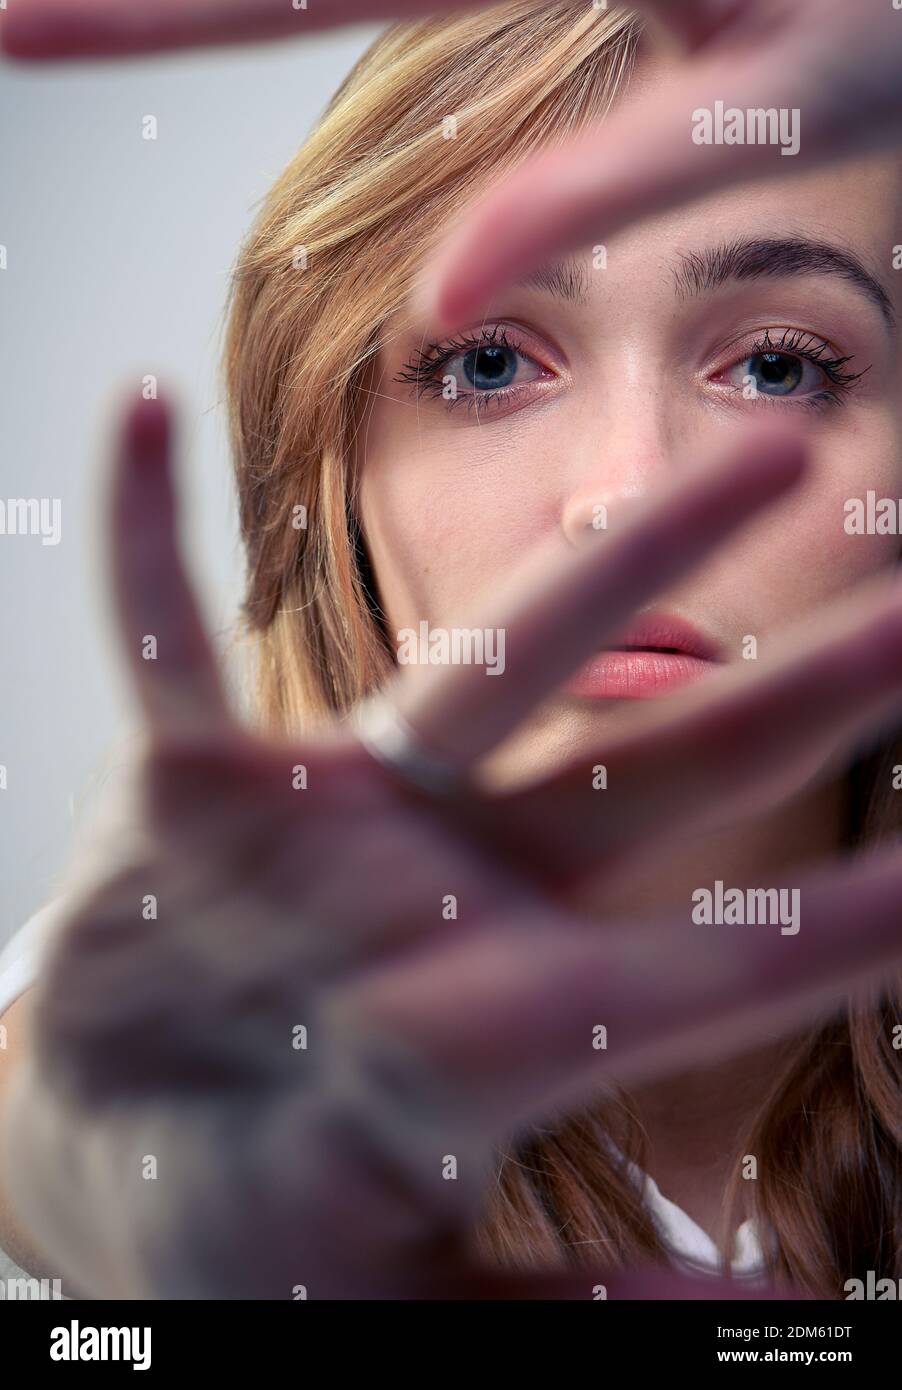 Young beautiful women (Age 20) holds hands up to camera to create a foreground and peers through her fingers bringing attention to her eyes. Stock Photo